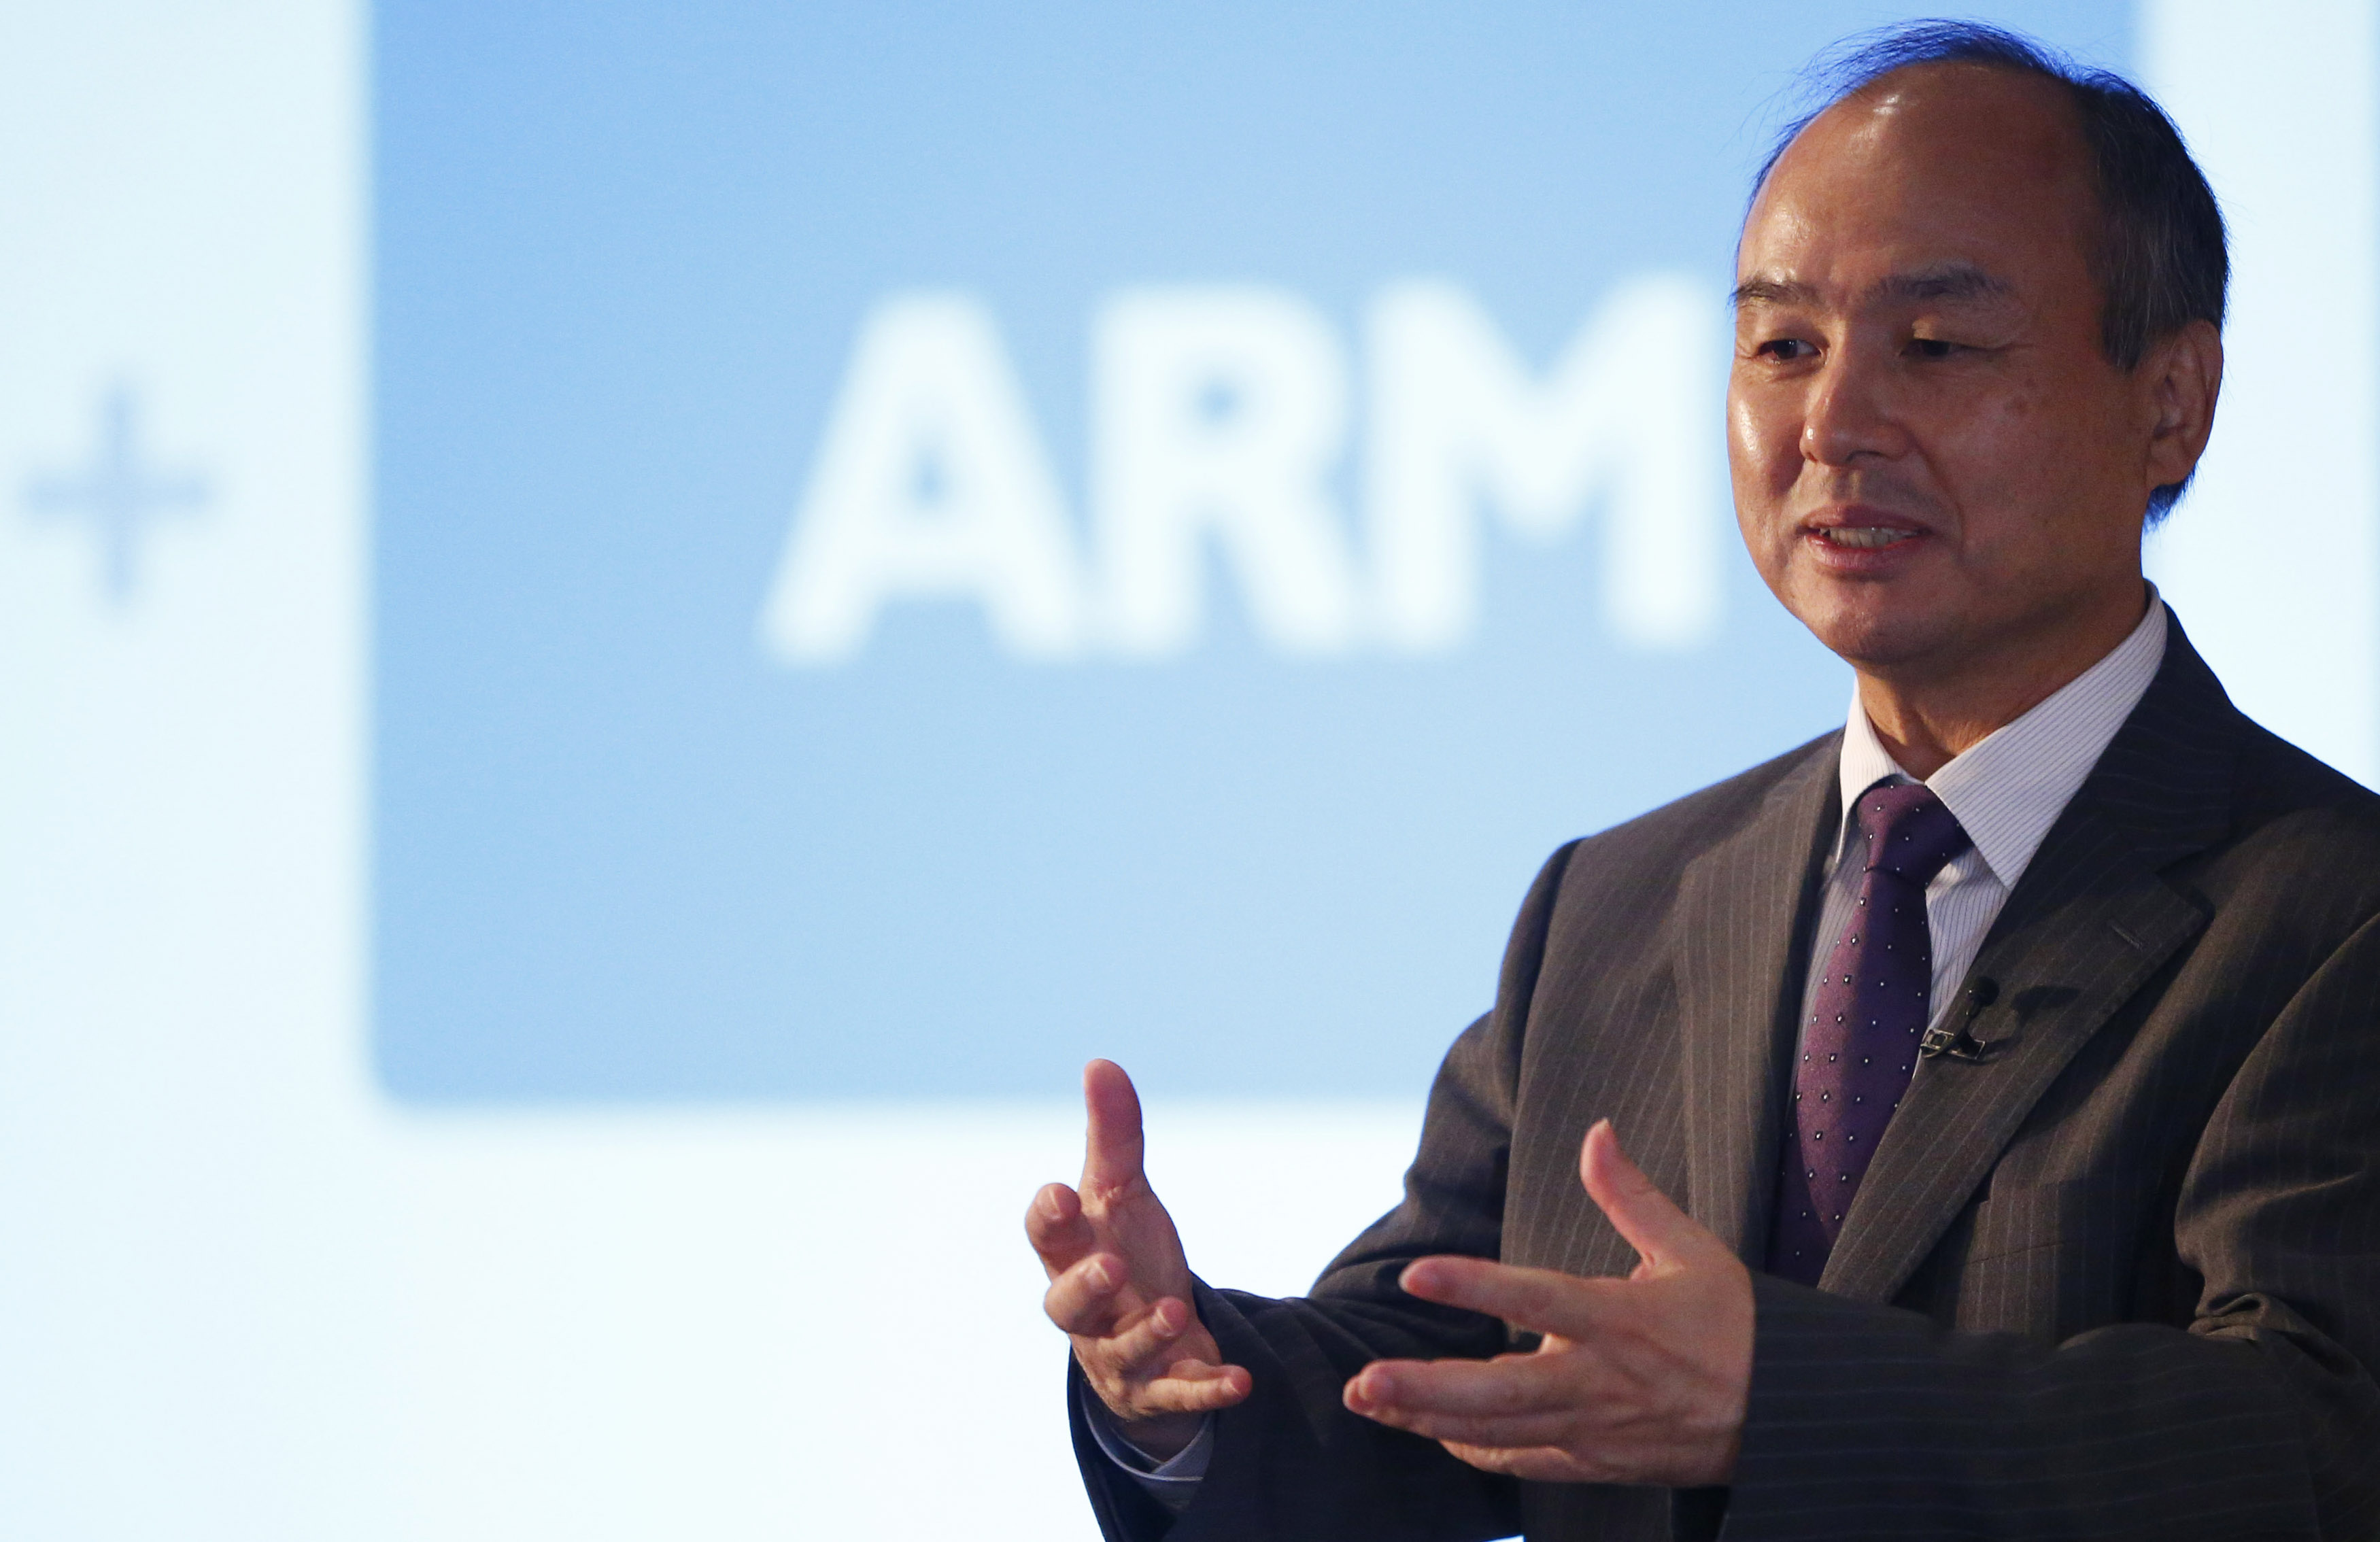 CEO of the SoftBank Group Masayoshi Son speaks at a new conference in London